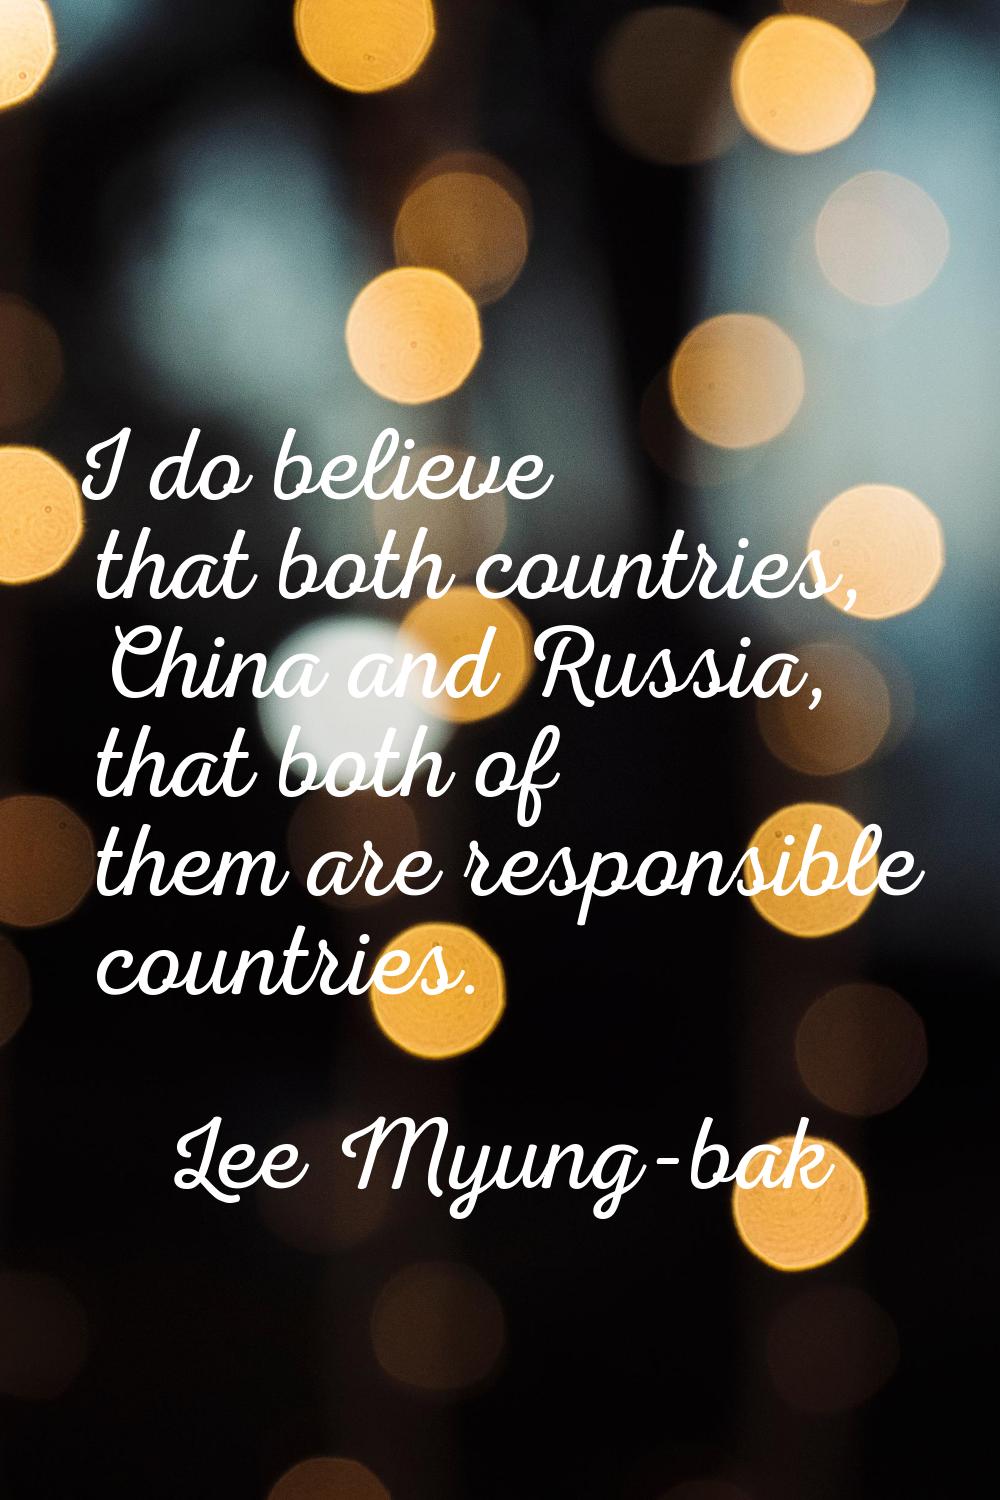 I do believe that both countries, China and Russia, that both of them are responsible countries.